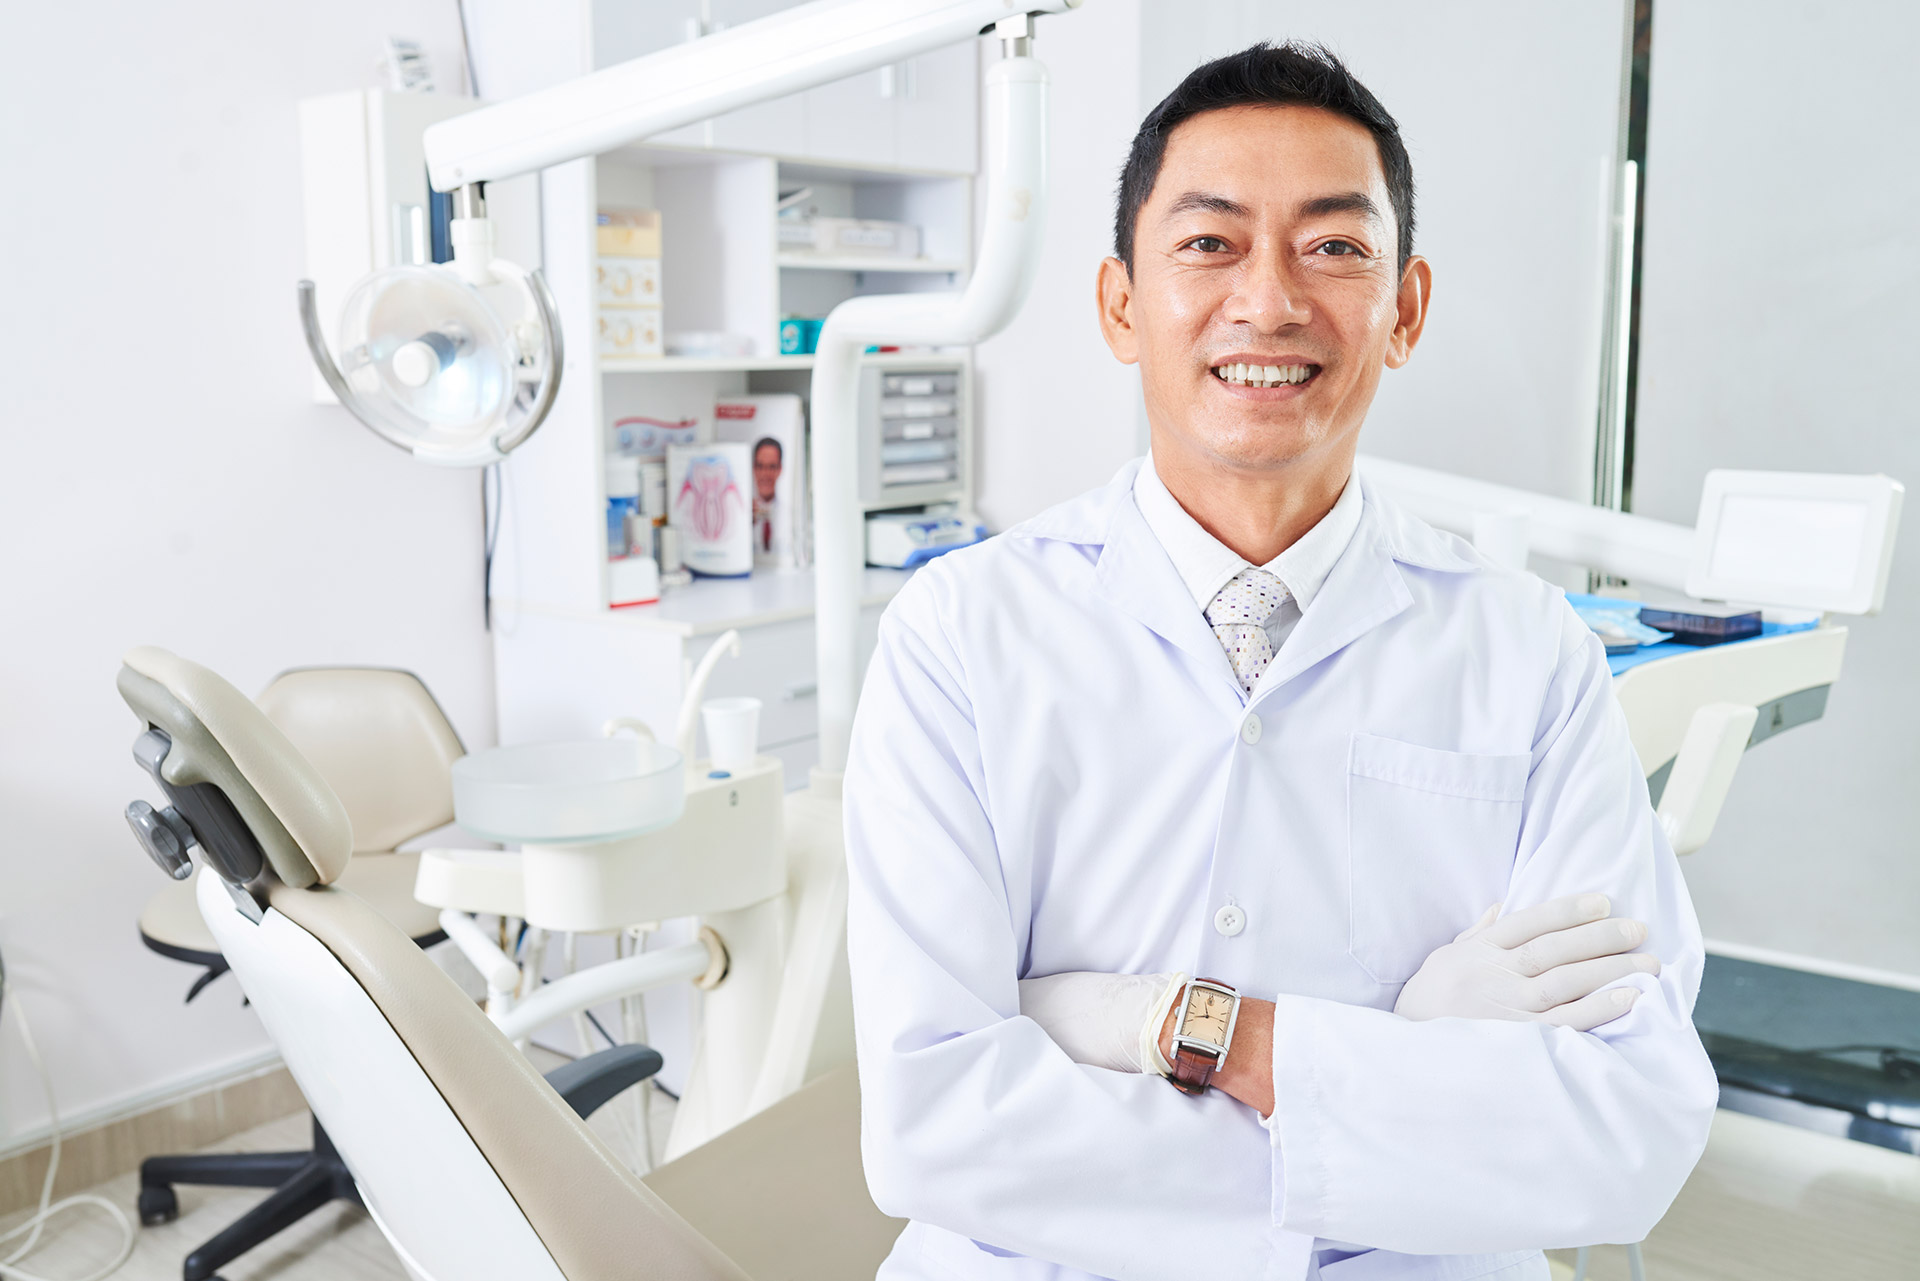 Dentist happy about reaching his surrounding communities through dental SEO using an advanced SEO strategy like geo-targeted landing pages from BrilliantDoc